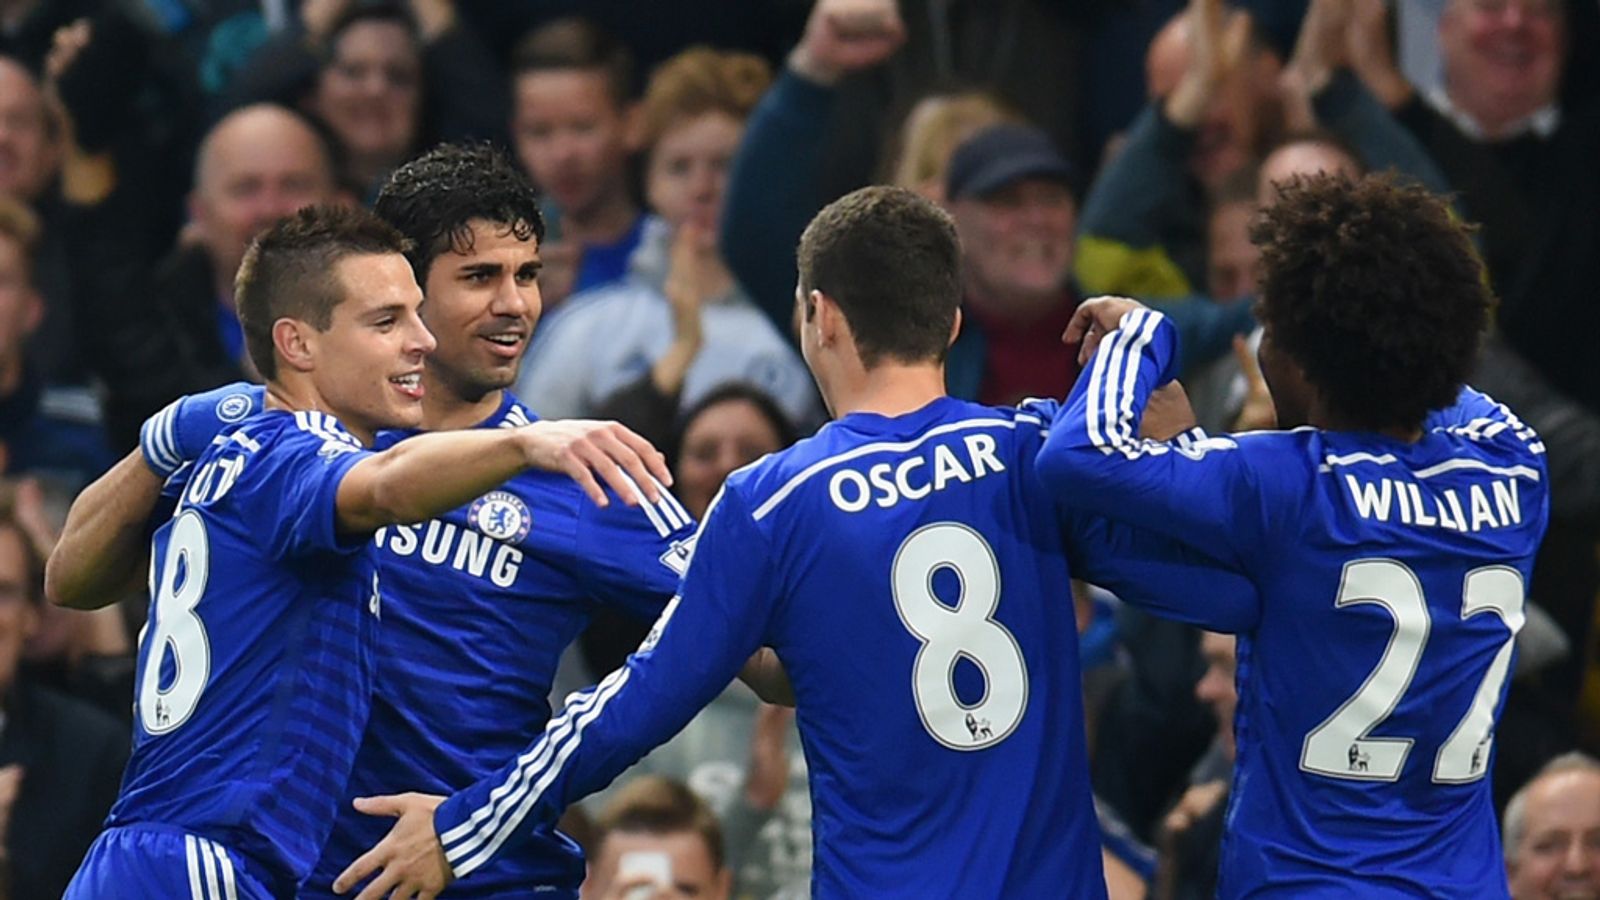 Chelsea 2 - 0 W Brom - Match Report & Highlights